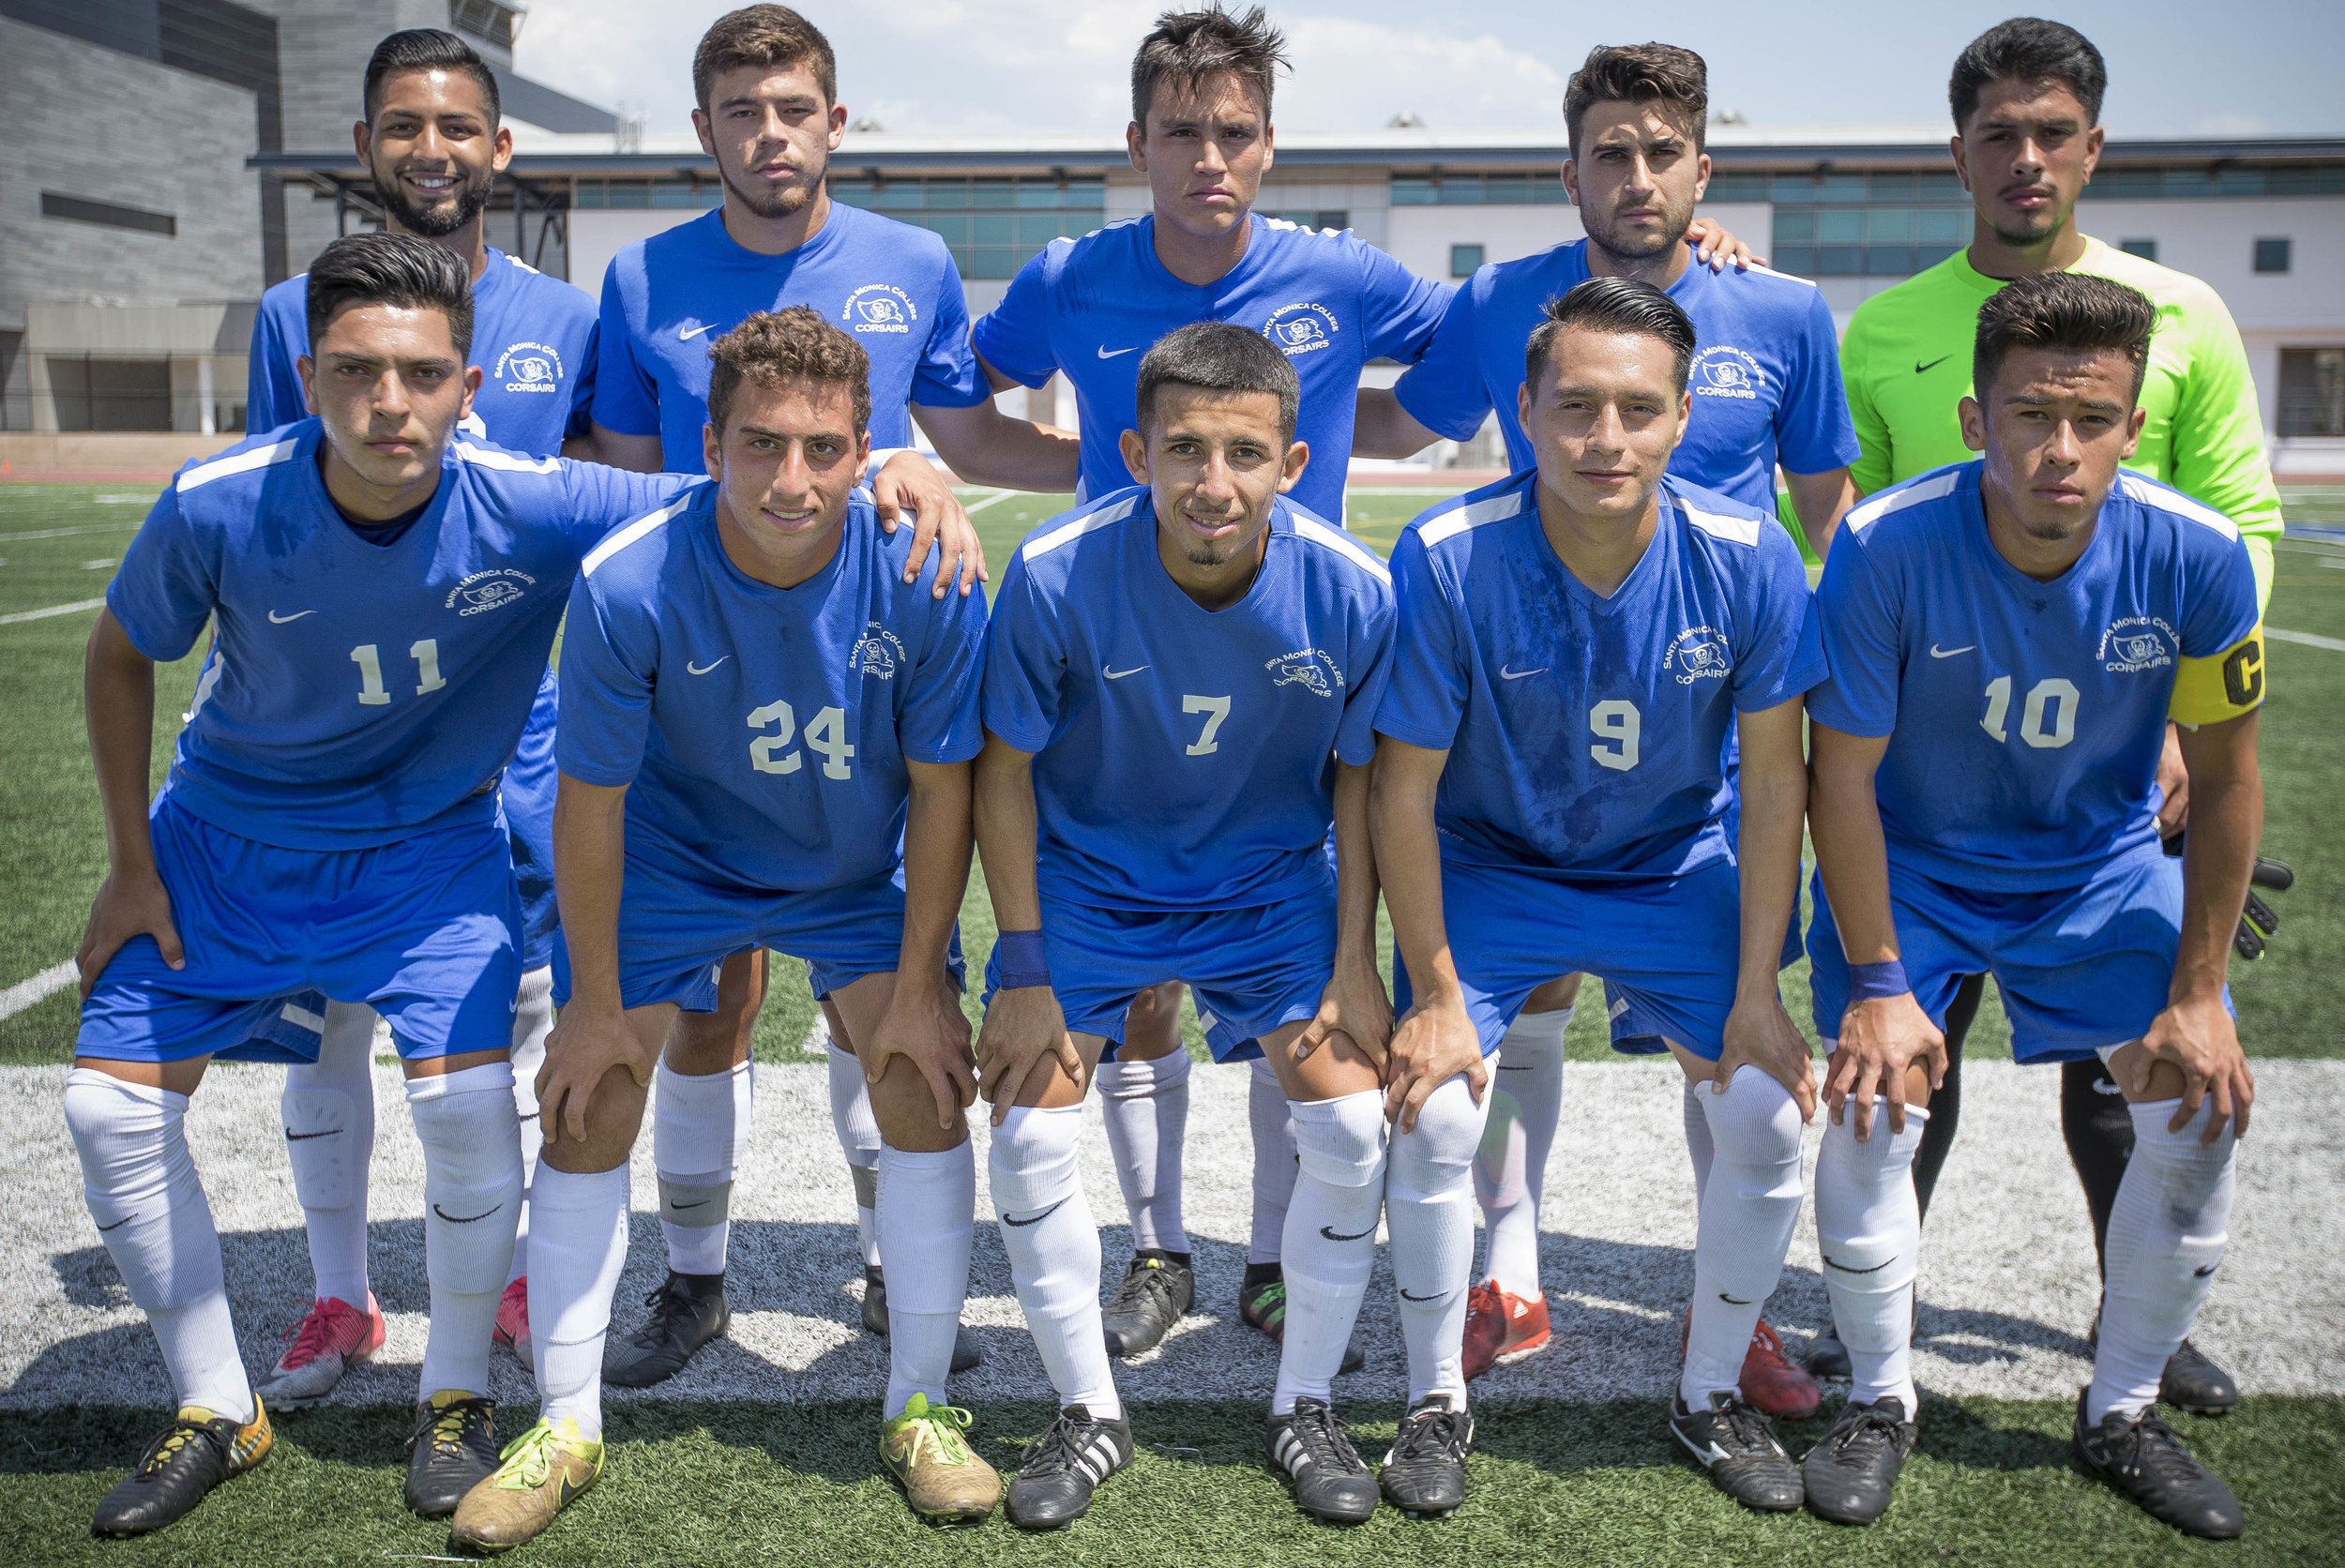  The starting players for Santa Monica College Corsairs mens soccer team posing for a photo before play against the El Camino College Warriors, Friday, September 1st, 2017, at the Sana Monica College Main Campus field in Santa Monica, CA. The Corsair